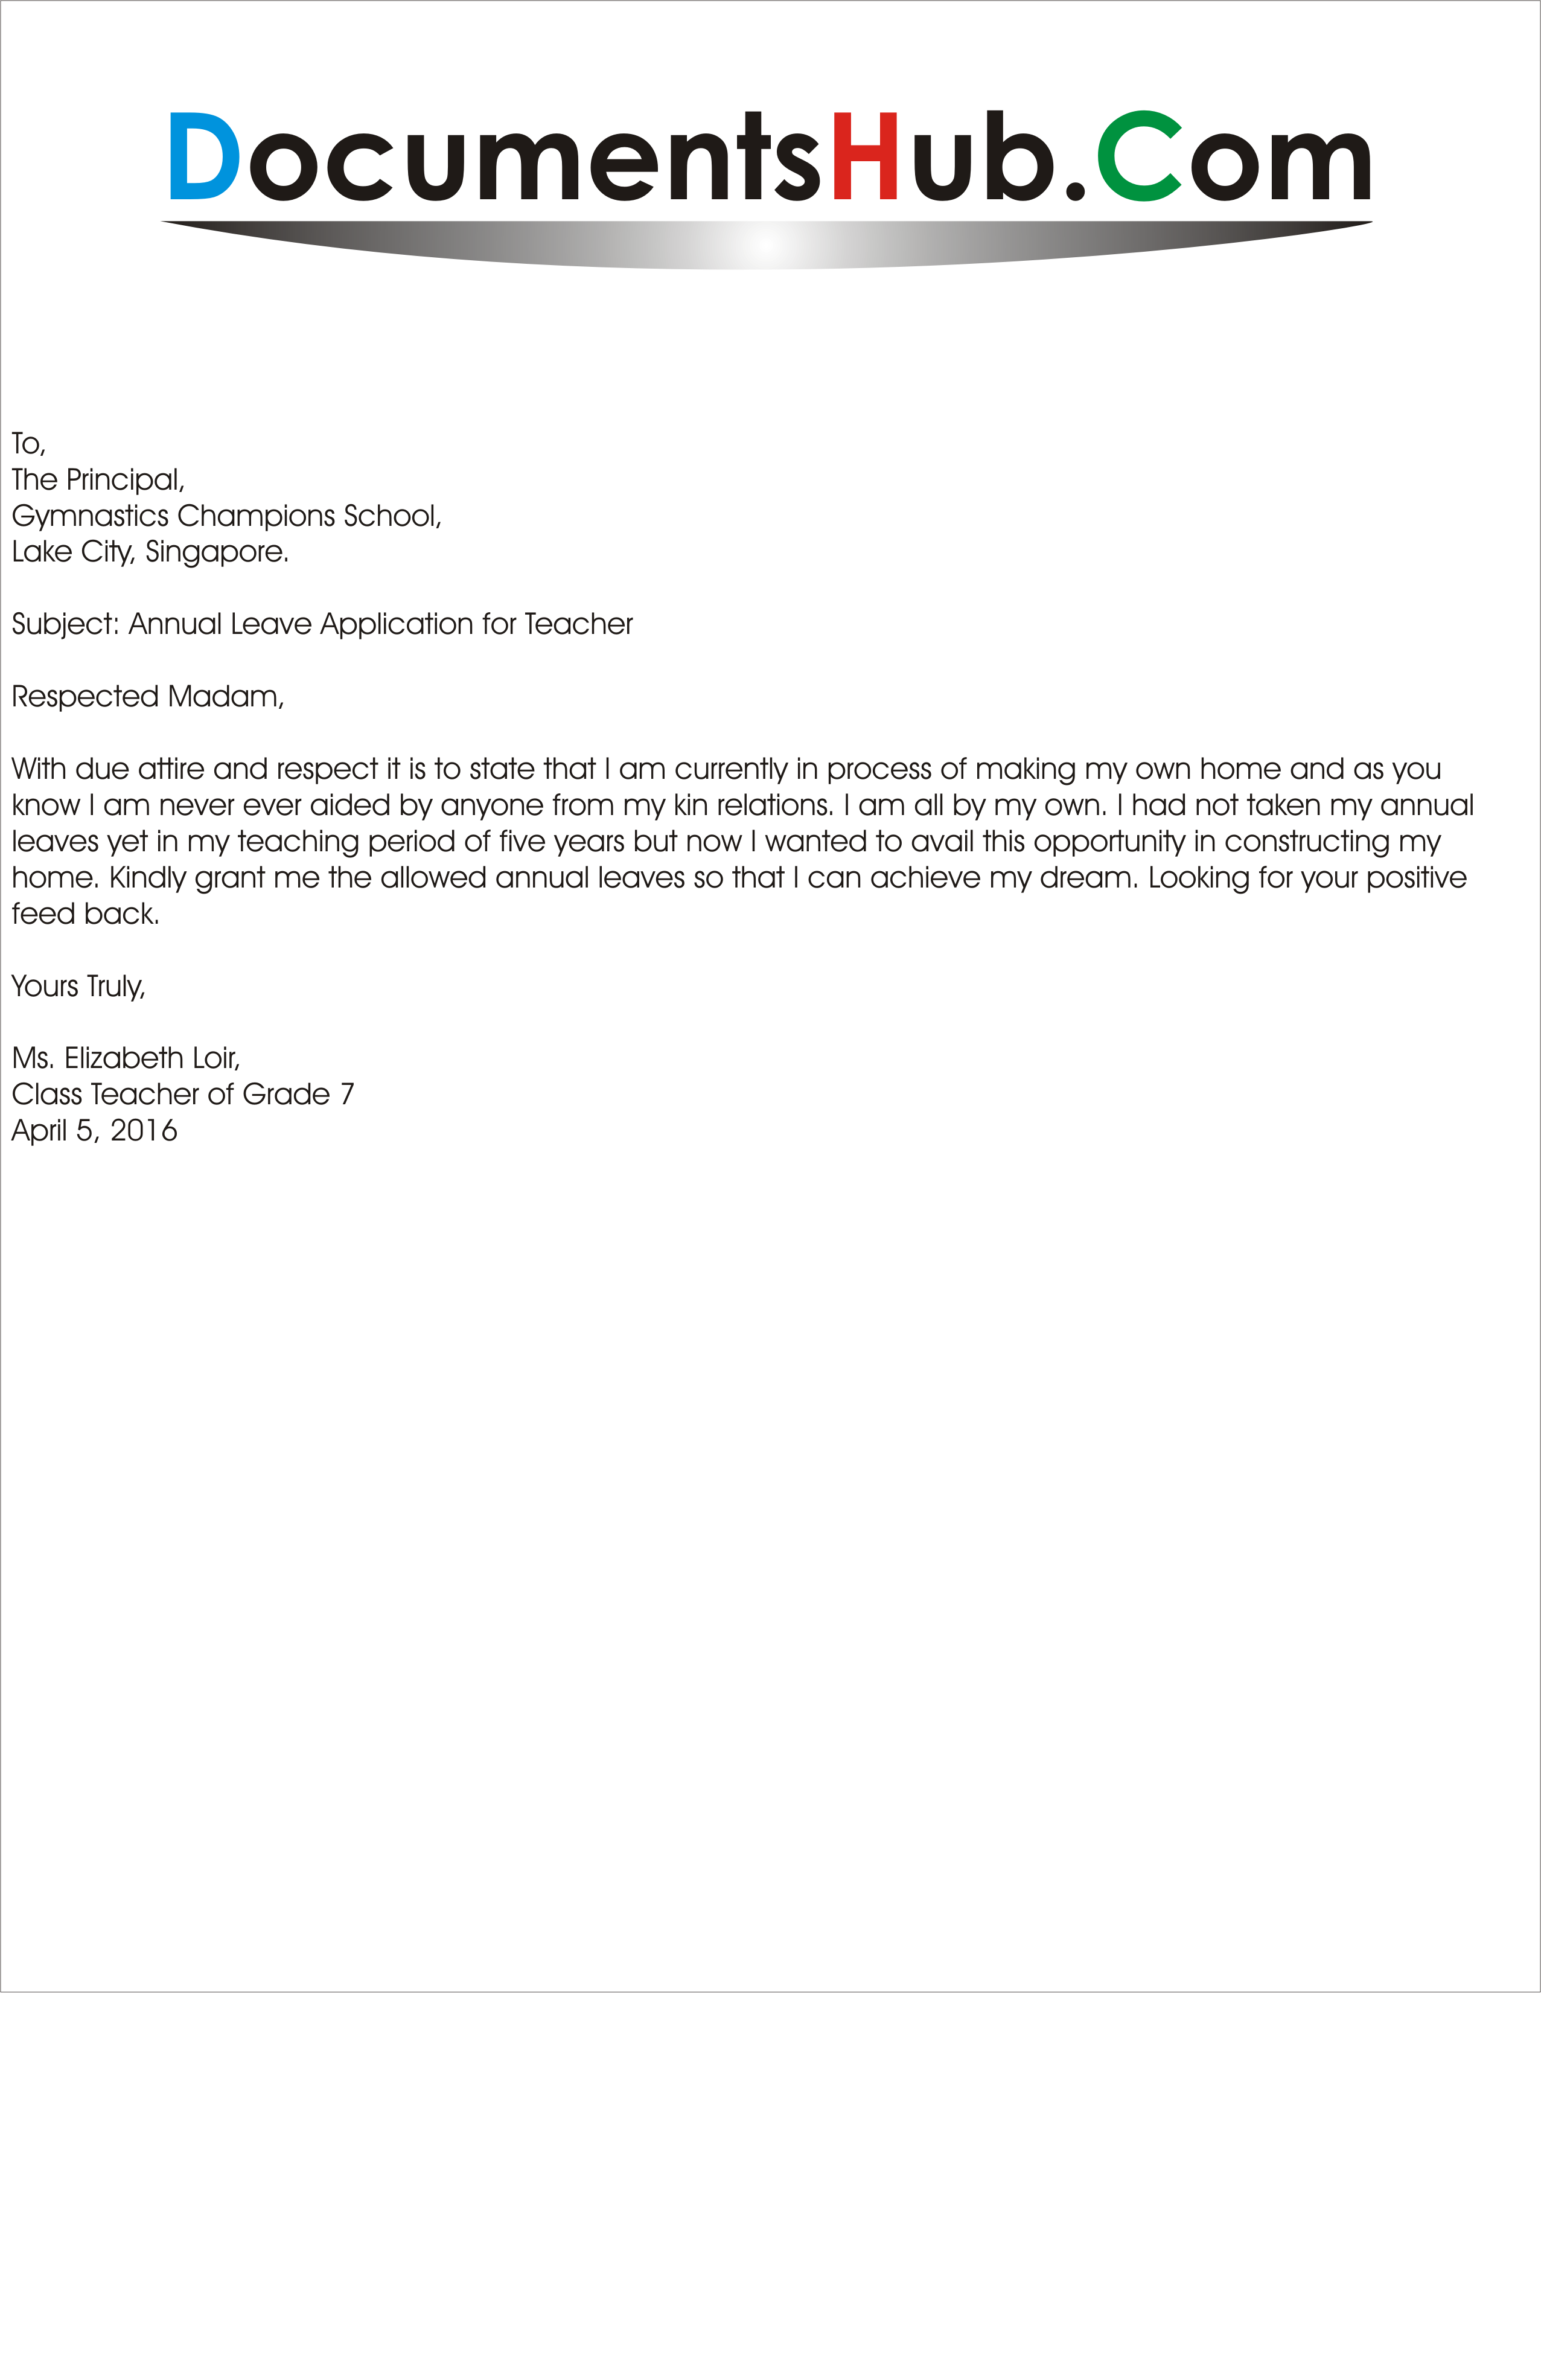 Sample Fmla Letter To Employer from documentshub.com